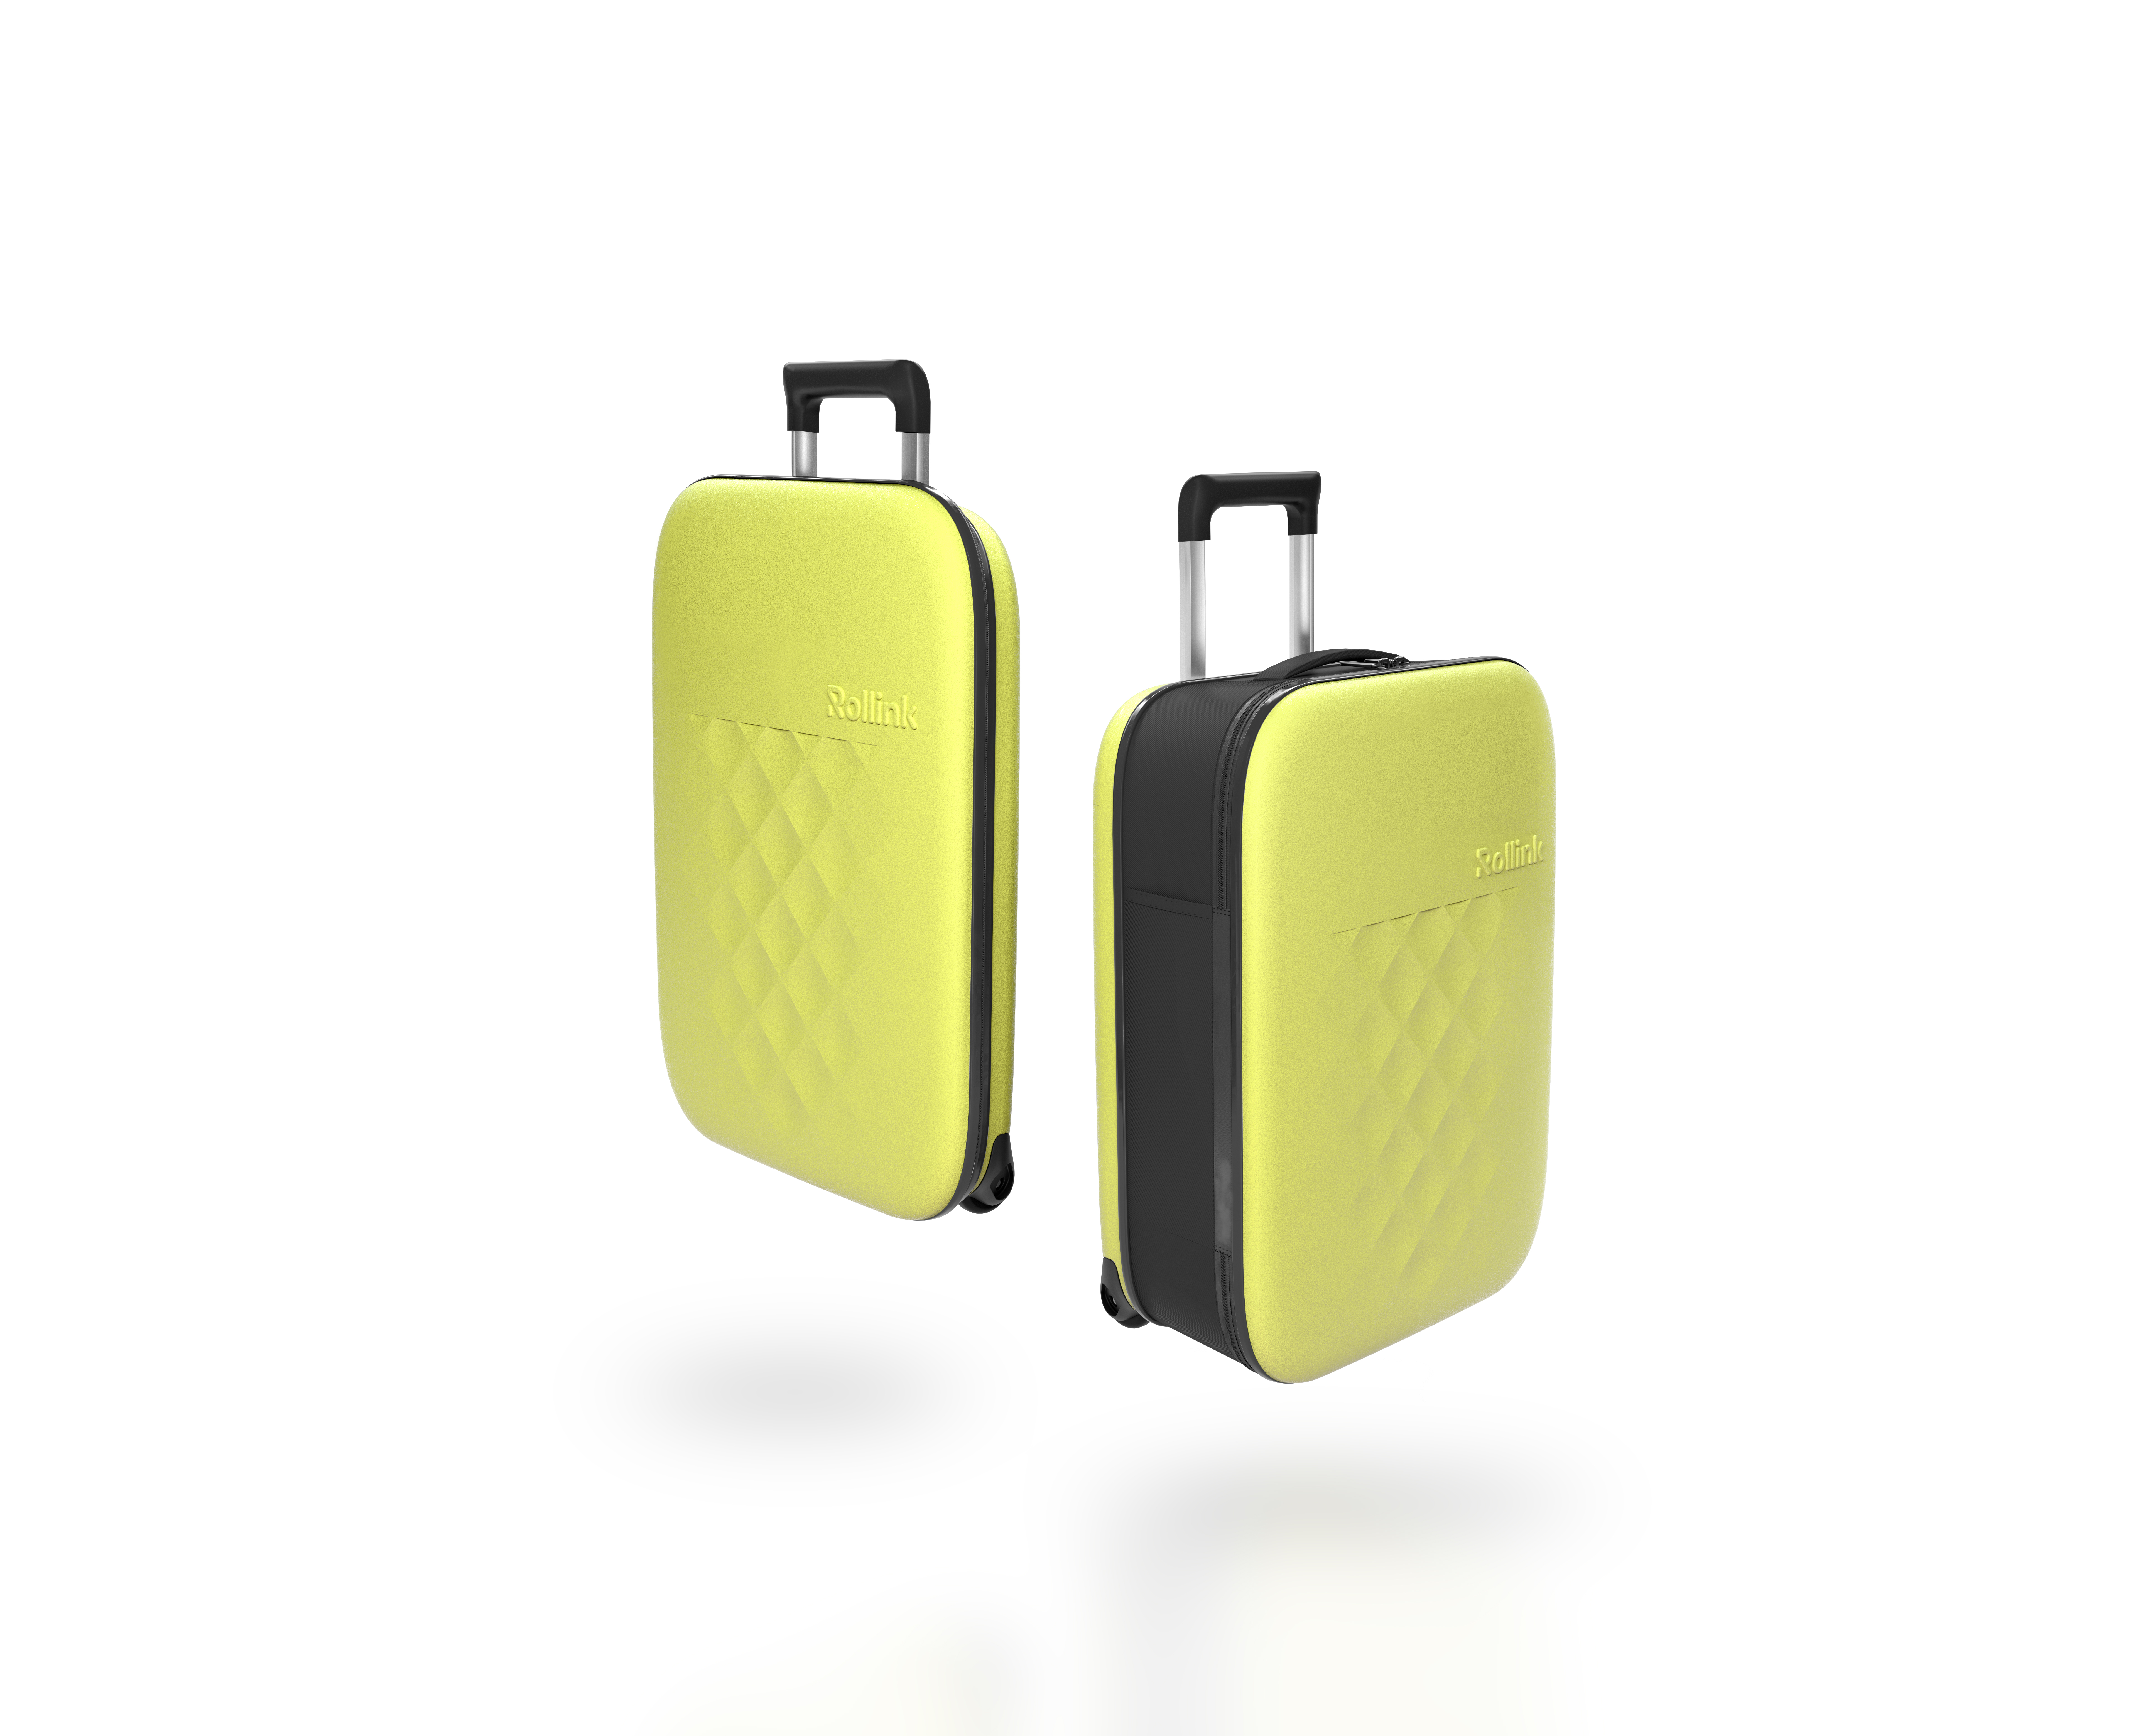 Rollink Flex 21 inch 2-Wheels Collapsible Carry-On Luggage, Yellow Iris